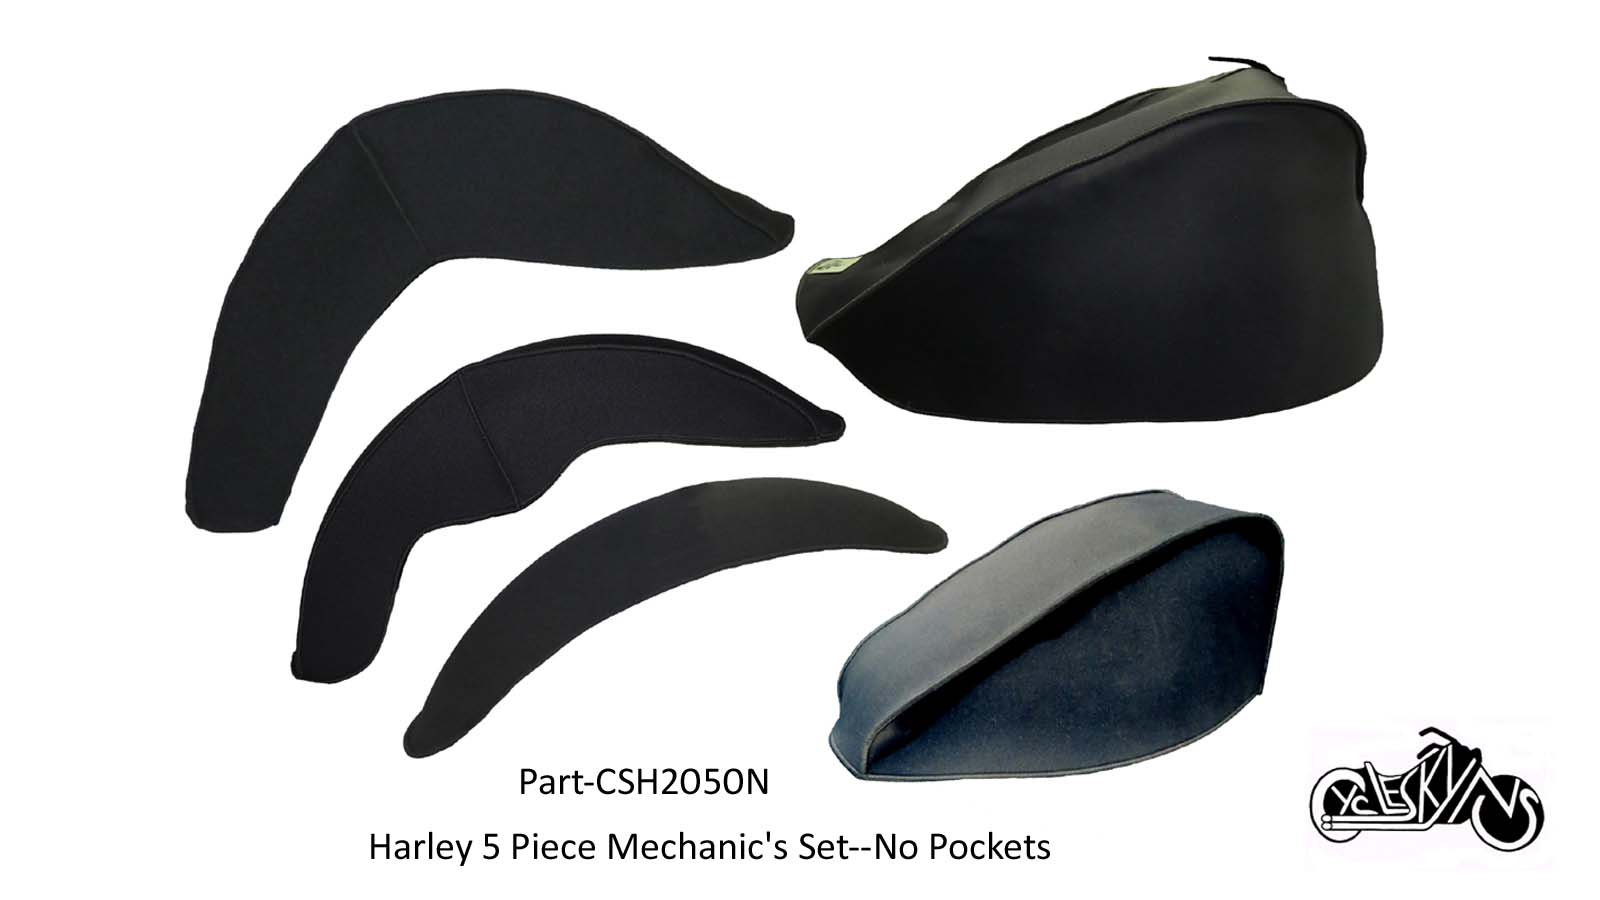 This is a 5 piece mechanic's set of covers including the Fat bob Tank cover, sportster tank cover, the large heritage style fender cover, the fat boy fender cover and the sportster style fender cover. This is the set without the pockets on the tank covers.